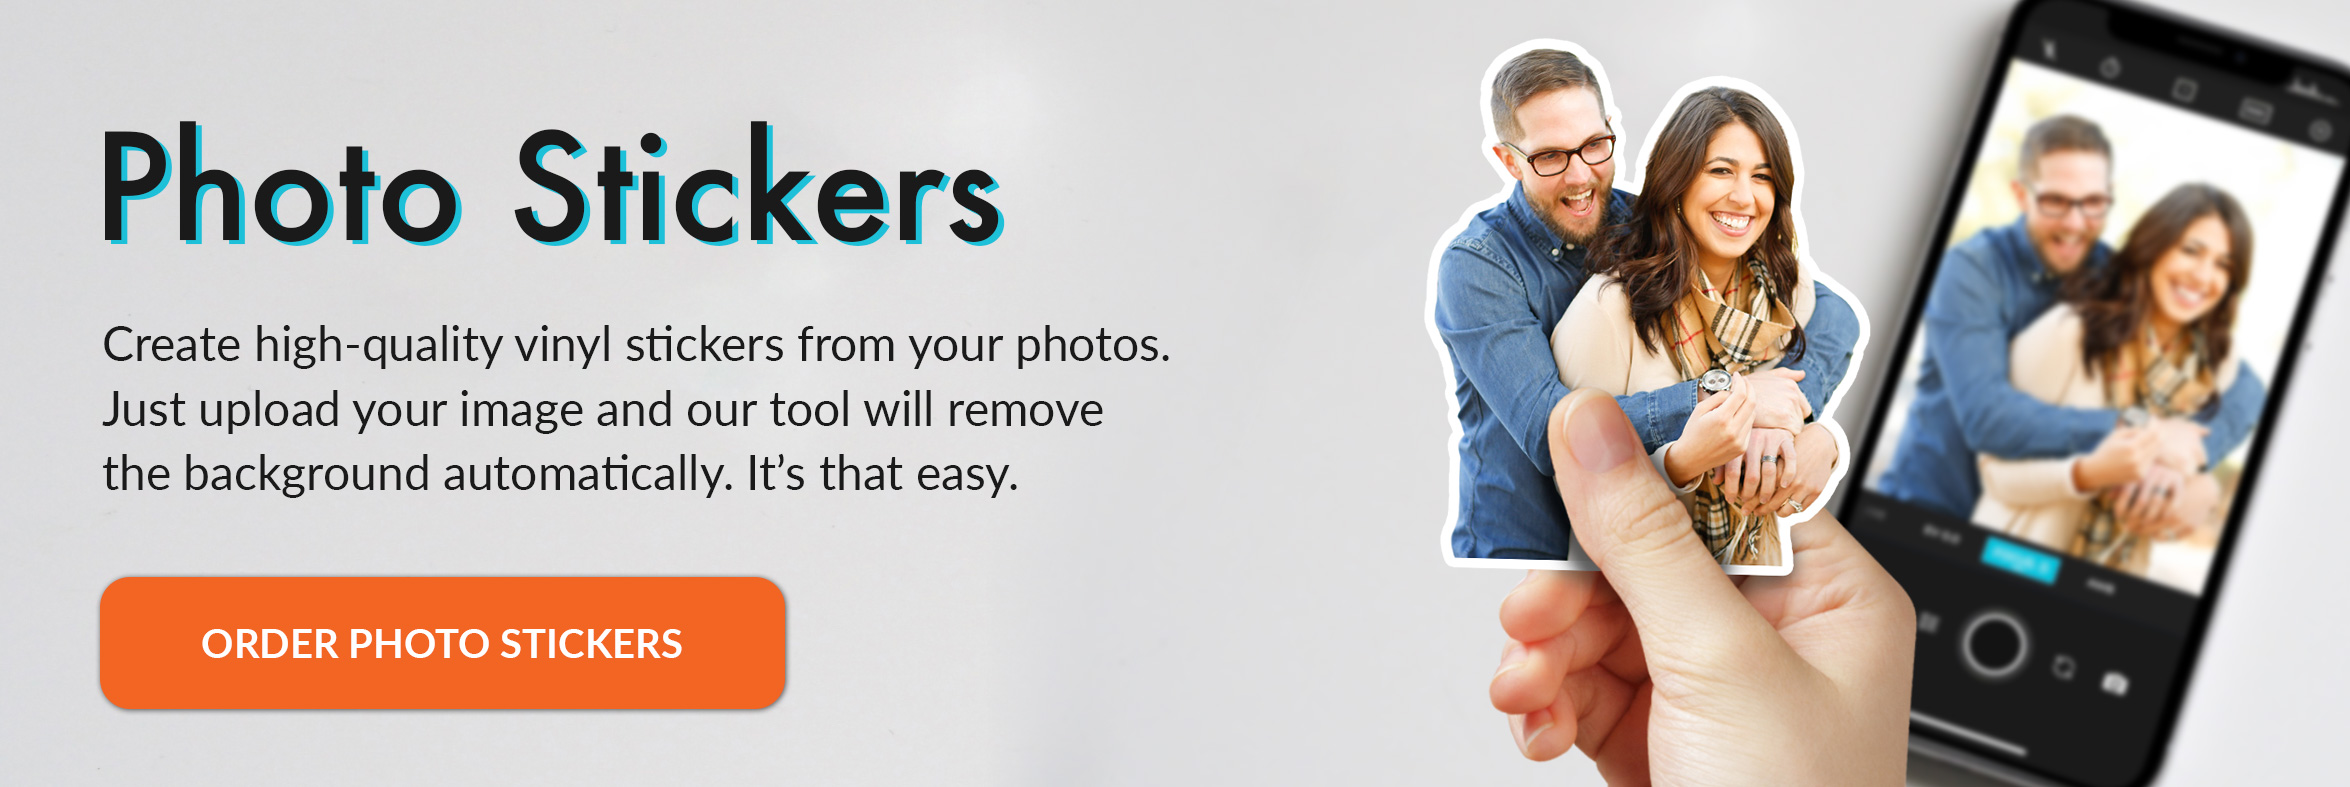 Photo Stickers Banner D